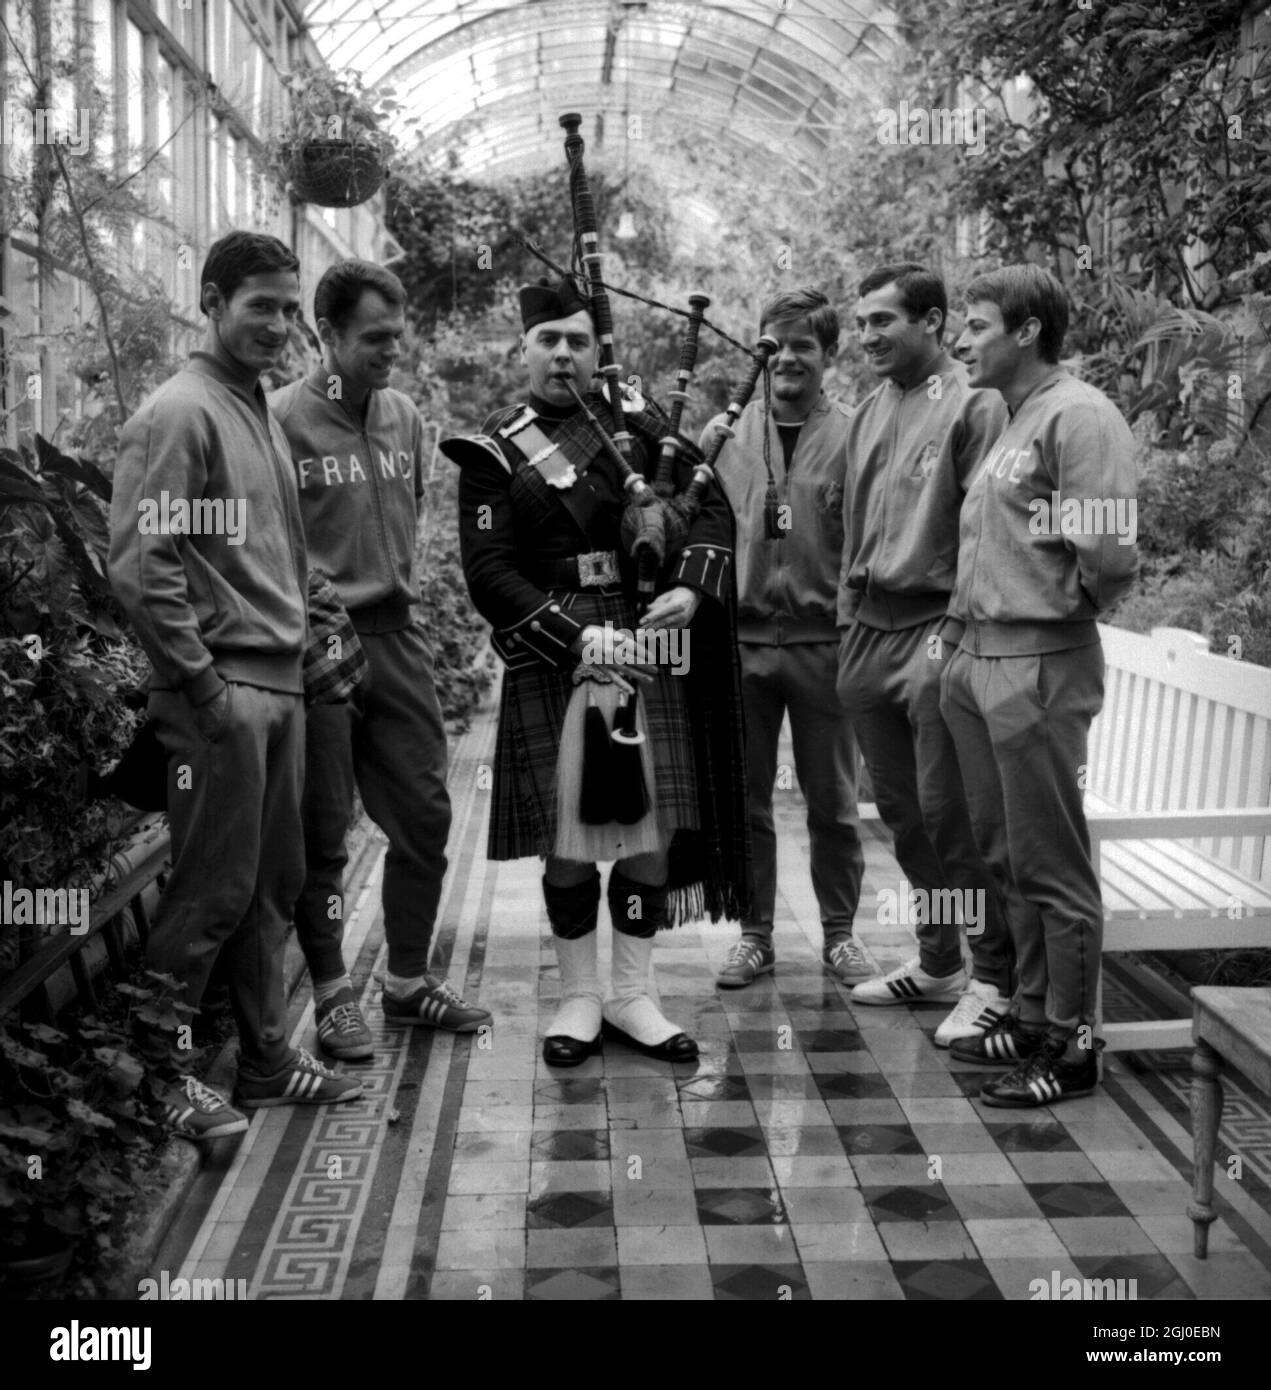 Scotland has had links with France since the time of the ill-fated Mary, Queen of Scots, and here cementing the friendship between the two countries, is resident piper of Peebles Hotel, Scotland, Alexander Brown, wearing Royal Stewart tartan, playing his bagpipes for members of the French football team, currently in the UK for next month's World Cup Games. The players are from left to right, Marcel (captain); Lucien Muller; Robert Budzinski (back); Aubour (goalkeeper) and Philippe Gondet (forward). 23rd June 1966. Stock Photo